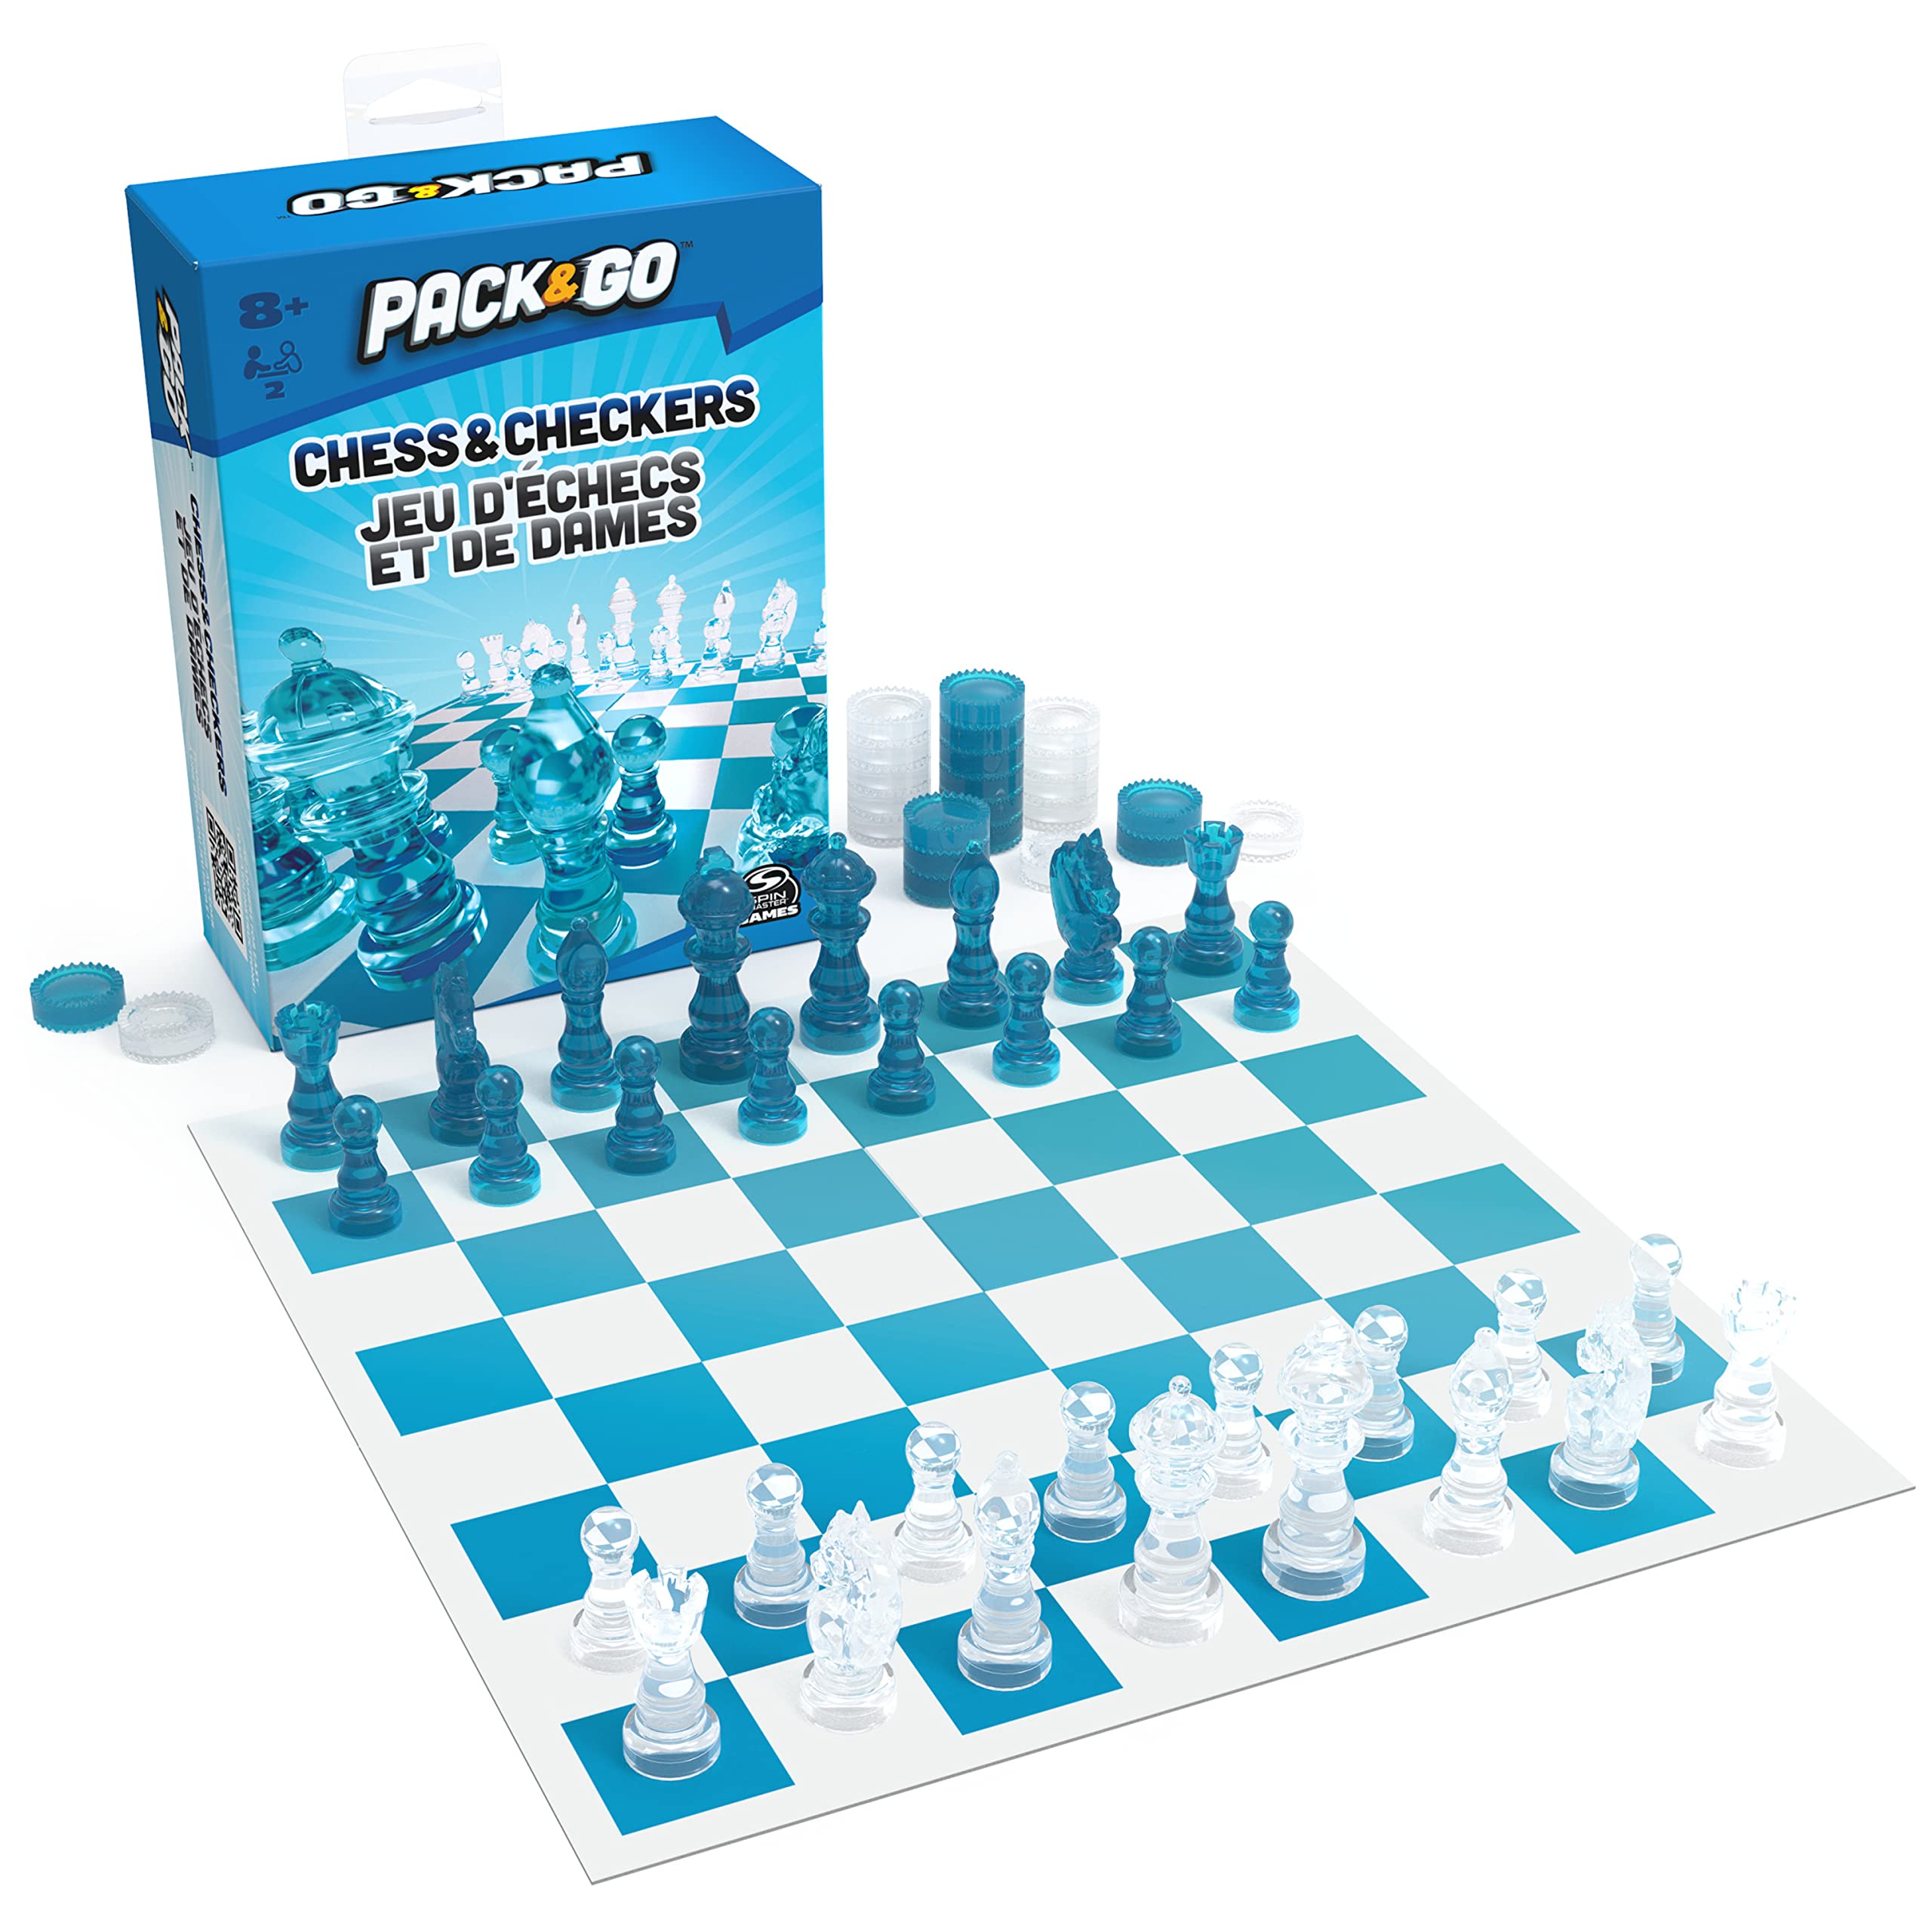 Spin Master Games Pack & Go Chess & Checkers Board Game from Spin Master Games Portable 2-Player Games Chess Board Chess Set for Adults and Kids Ages 8 and up